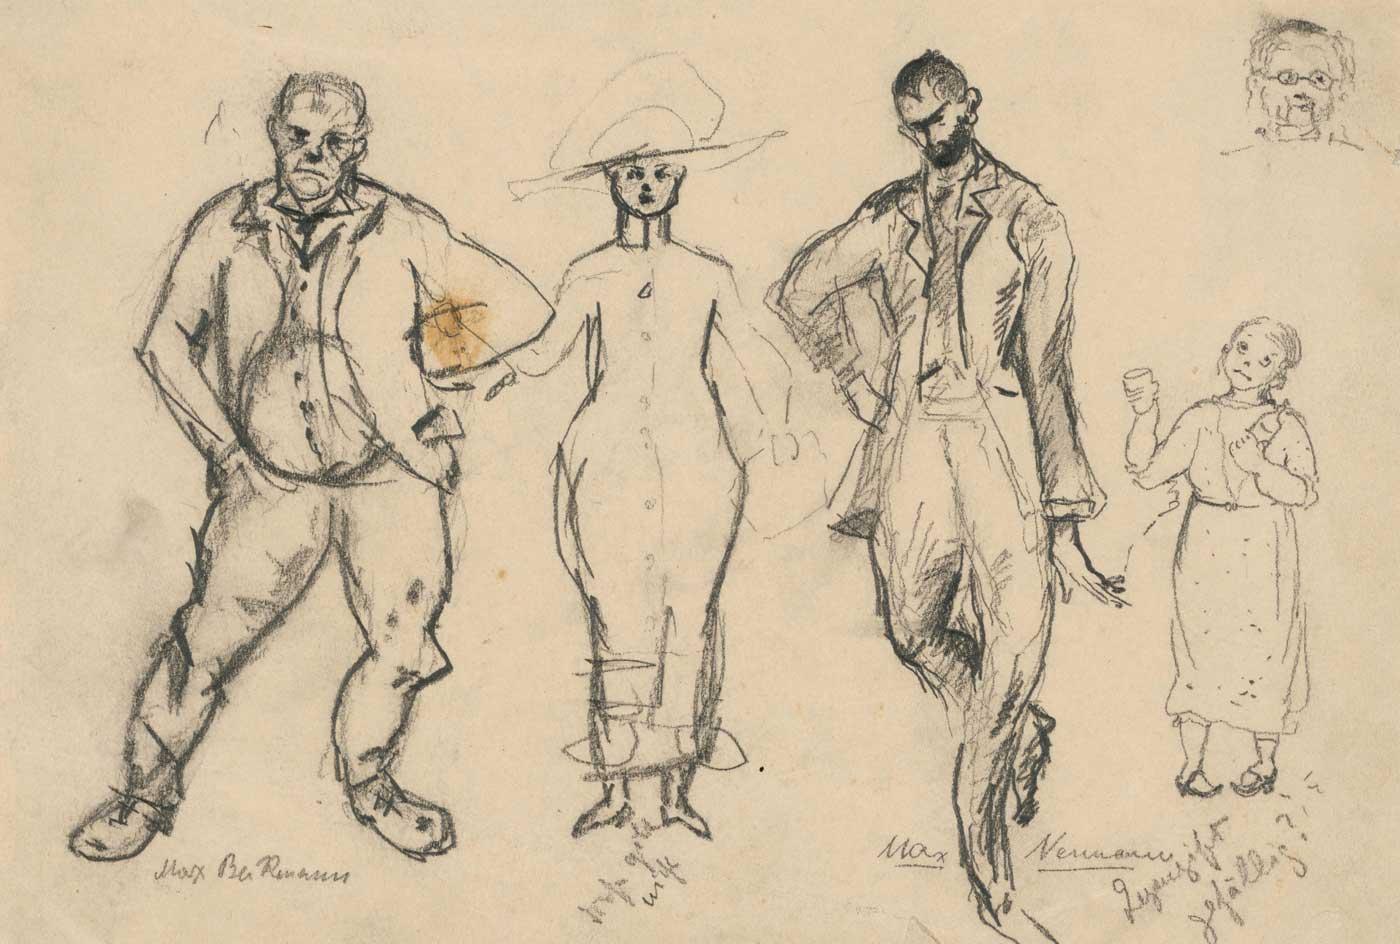 Antidote complacent? - Five caricatures, including Max Beckmann and Max Neumann, c. 1910.